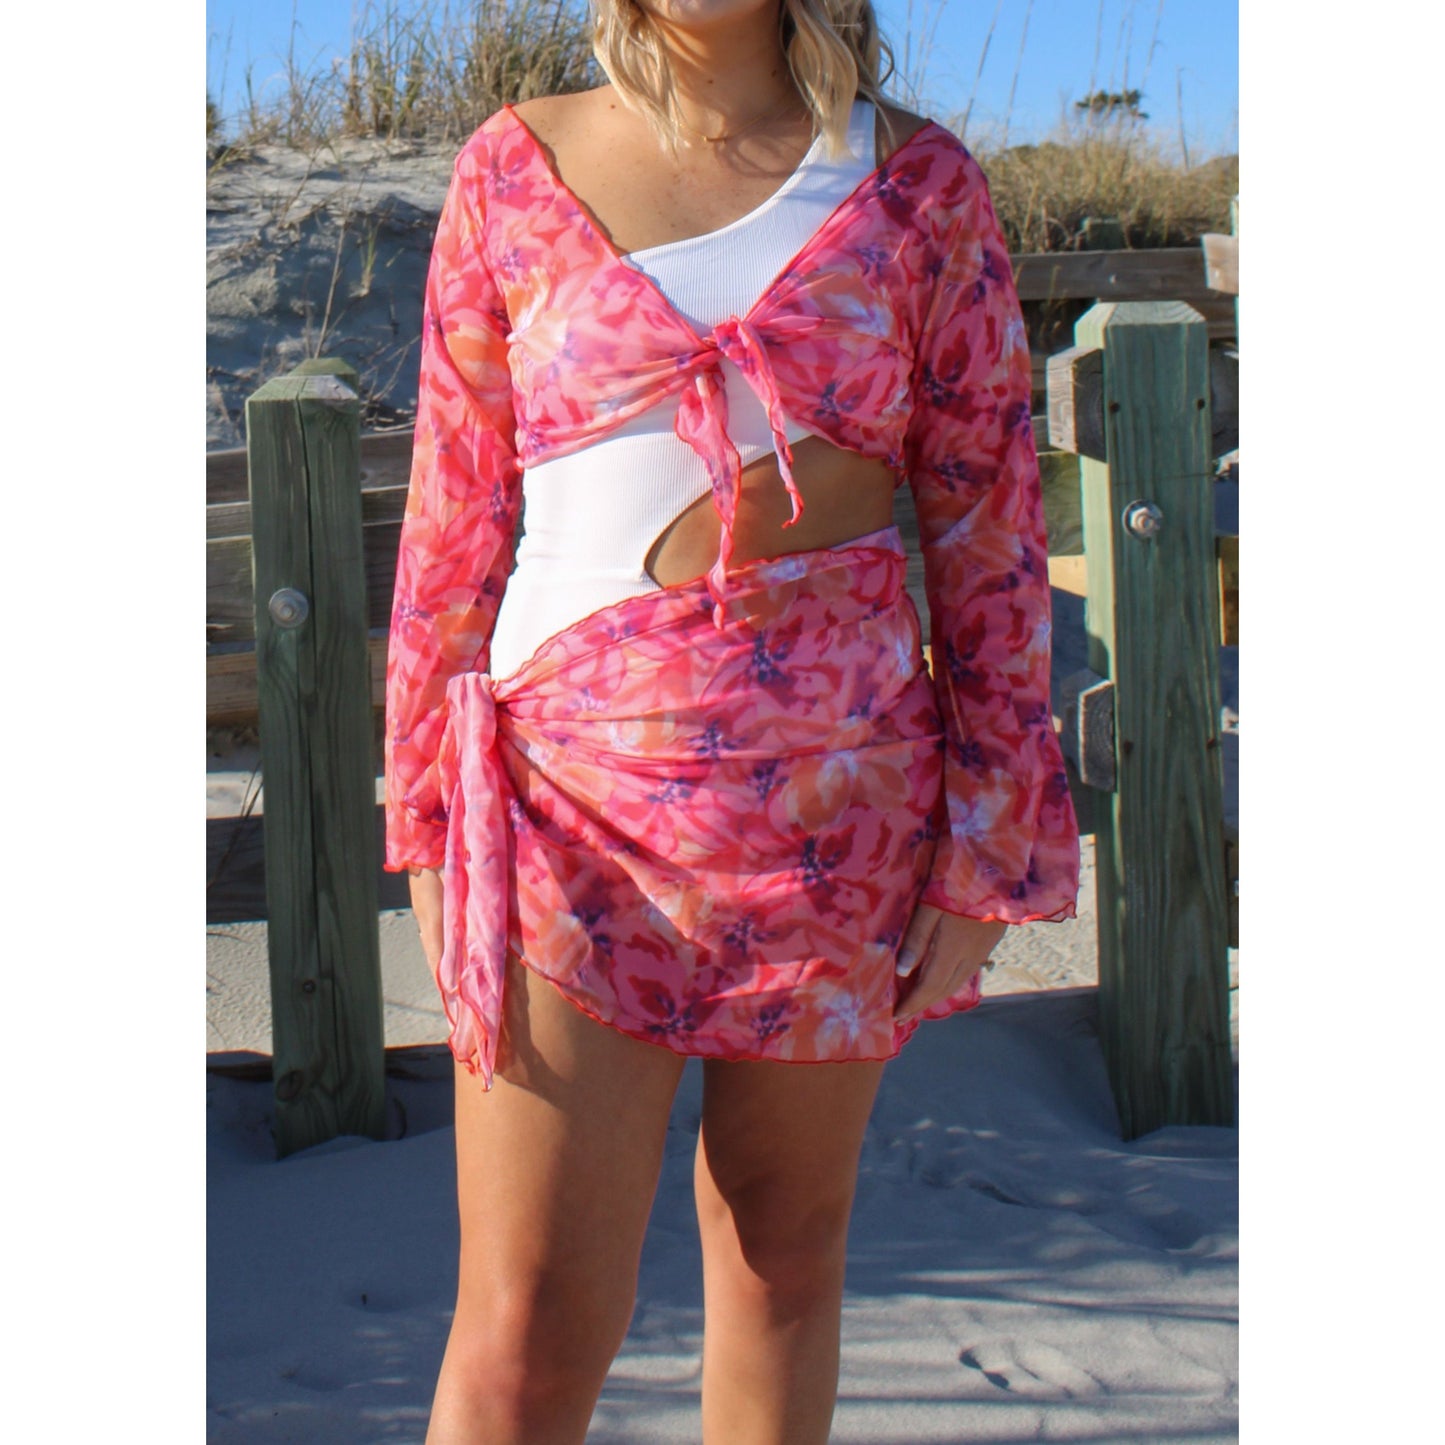 Emberly Floral Sheer Coverup, Pink/Red Floral